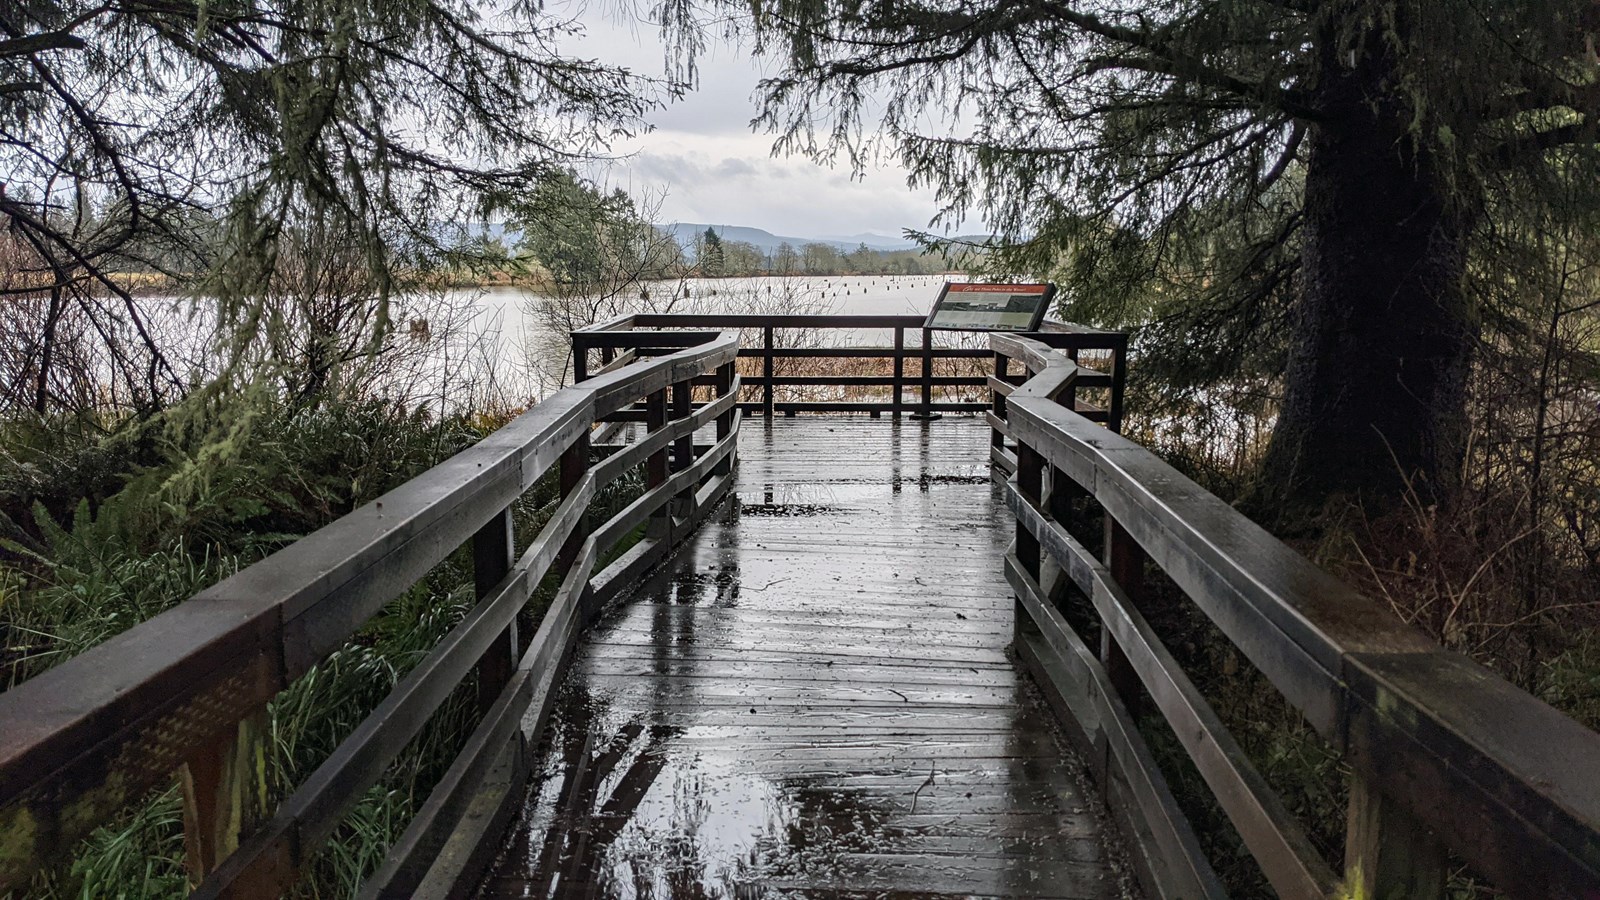 Wet with rain, a boardwalk leads out to the edge of a river surrounded by trees